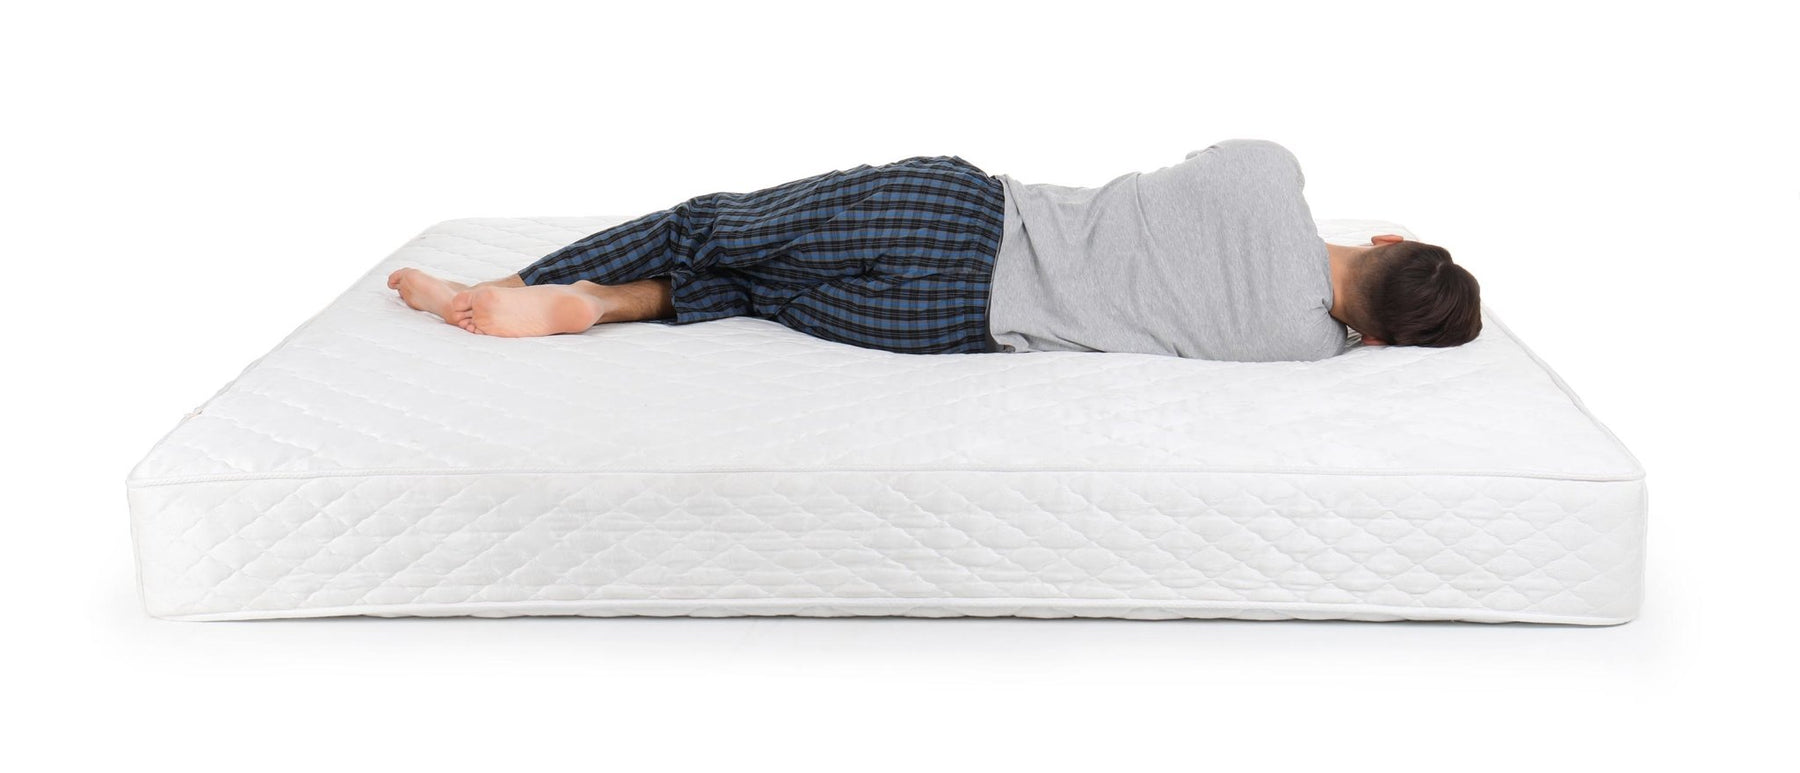 How Adjustable Bases Can Improve Your Sleeping Experience